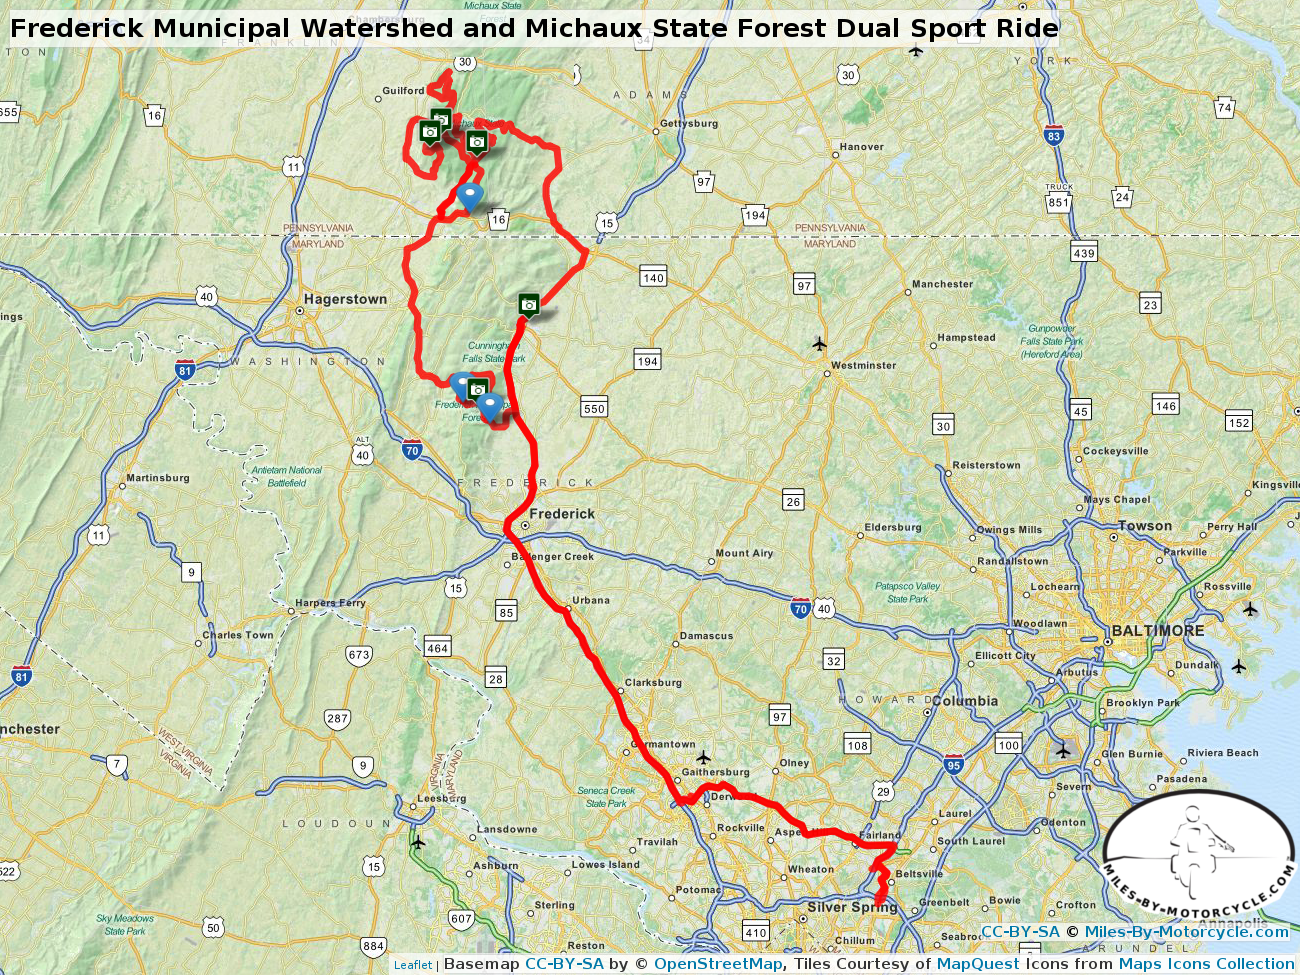 Frederick Municipal Watershed and Michaux State Forest Dual Sport Ride